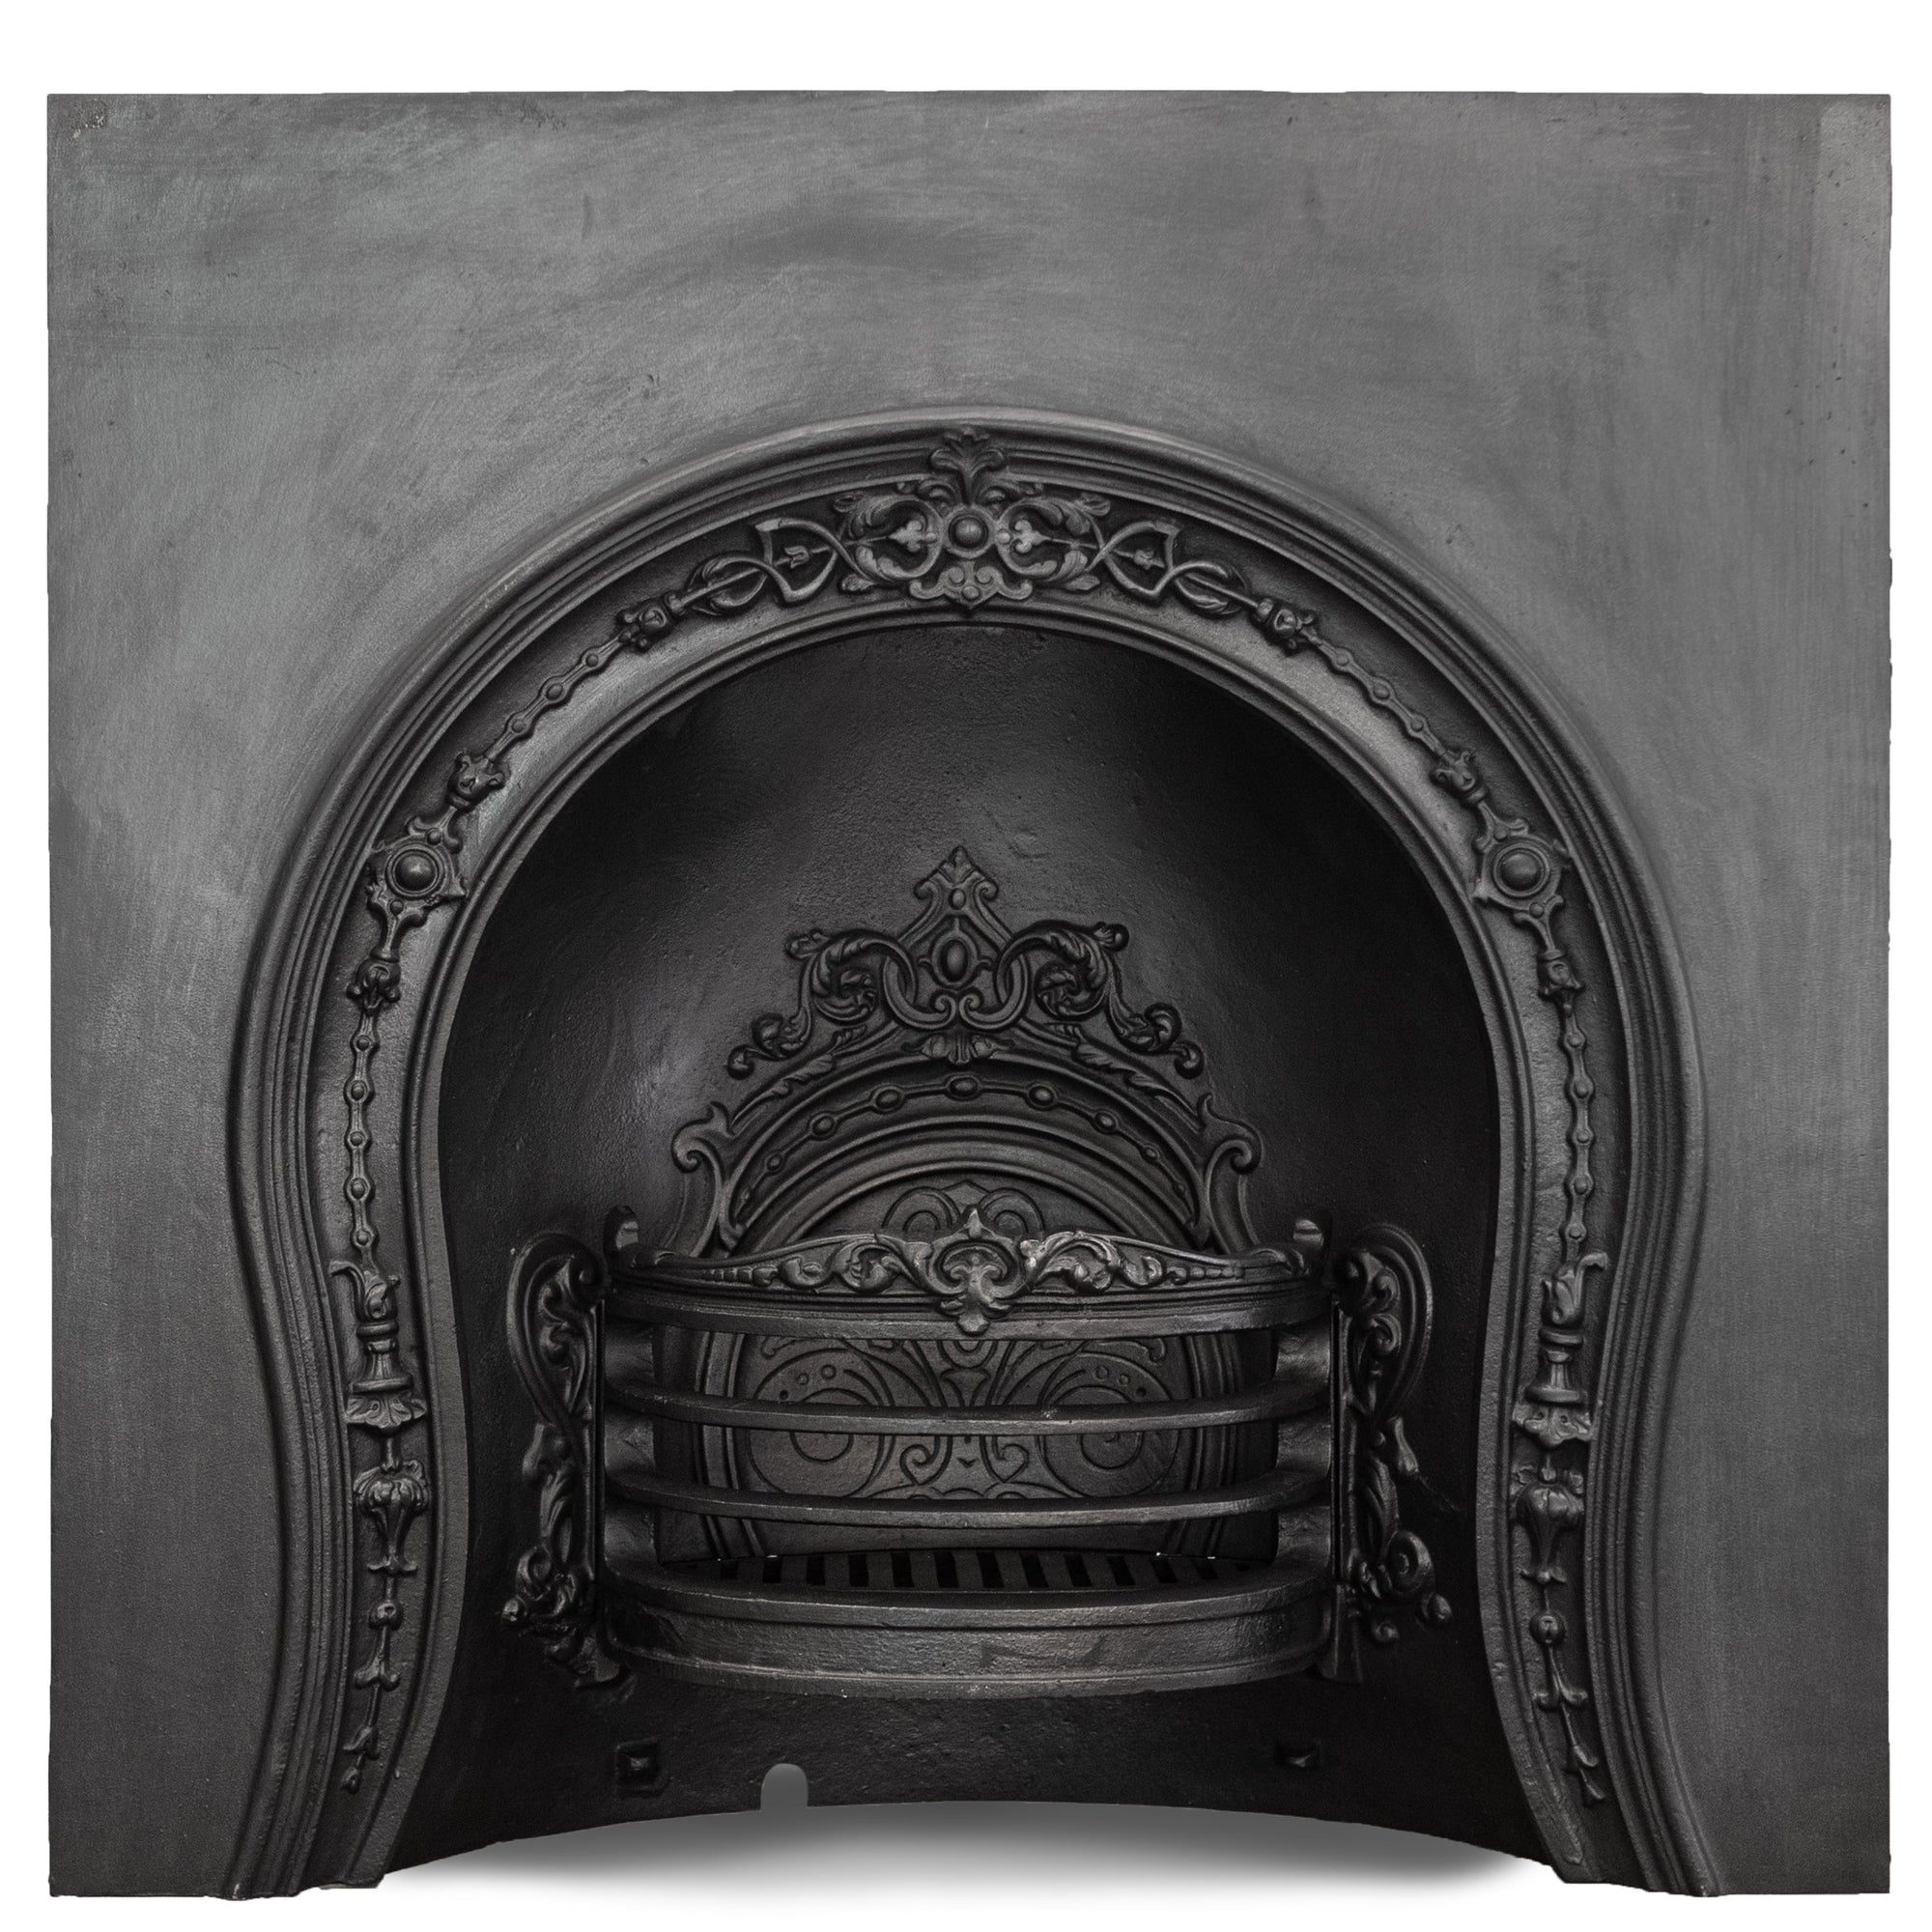 Antique Ornate Late Georgian, Early Victorian Cast Iron Insert | The Architectural Forum